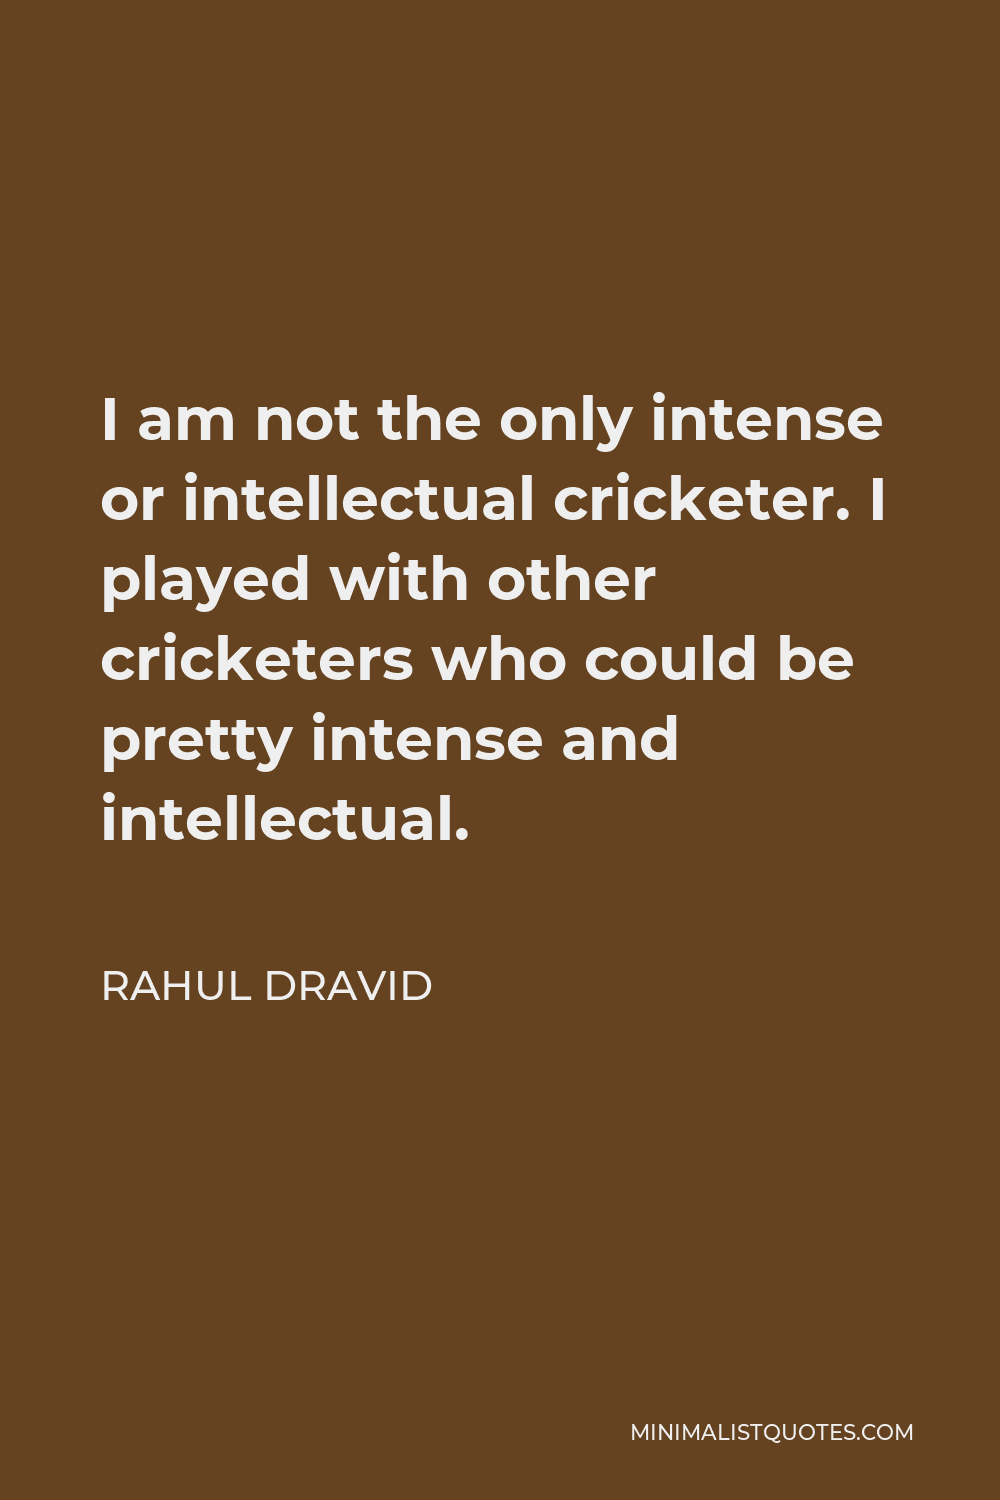 Rahul Dravid Quote - I am not the only intense or intellectual cricketer. I played with other cricketers who could be pretty intense and intellectual.